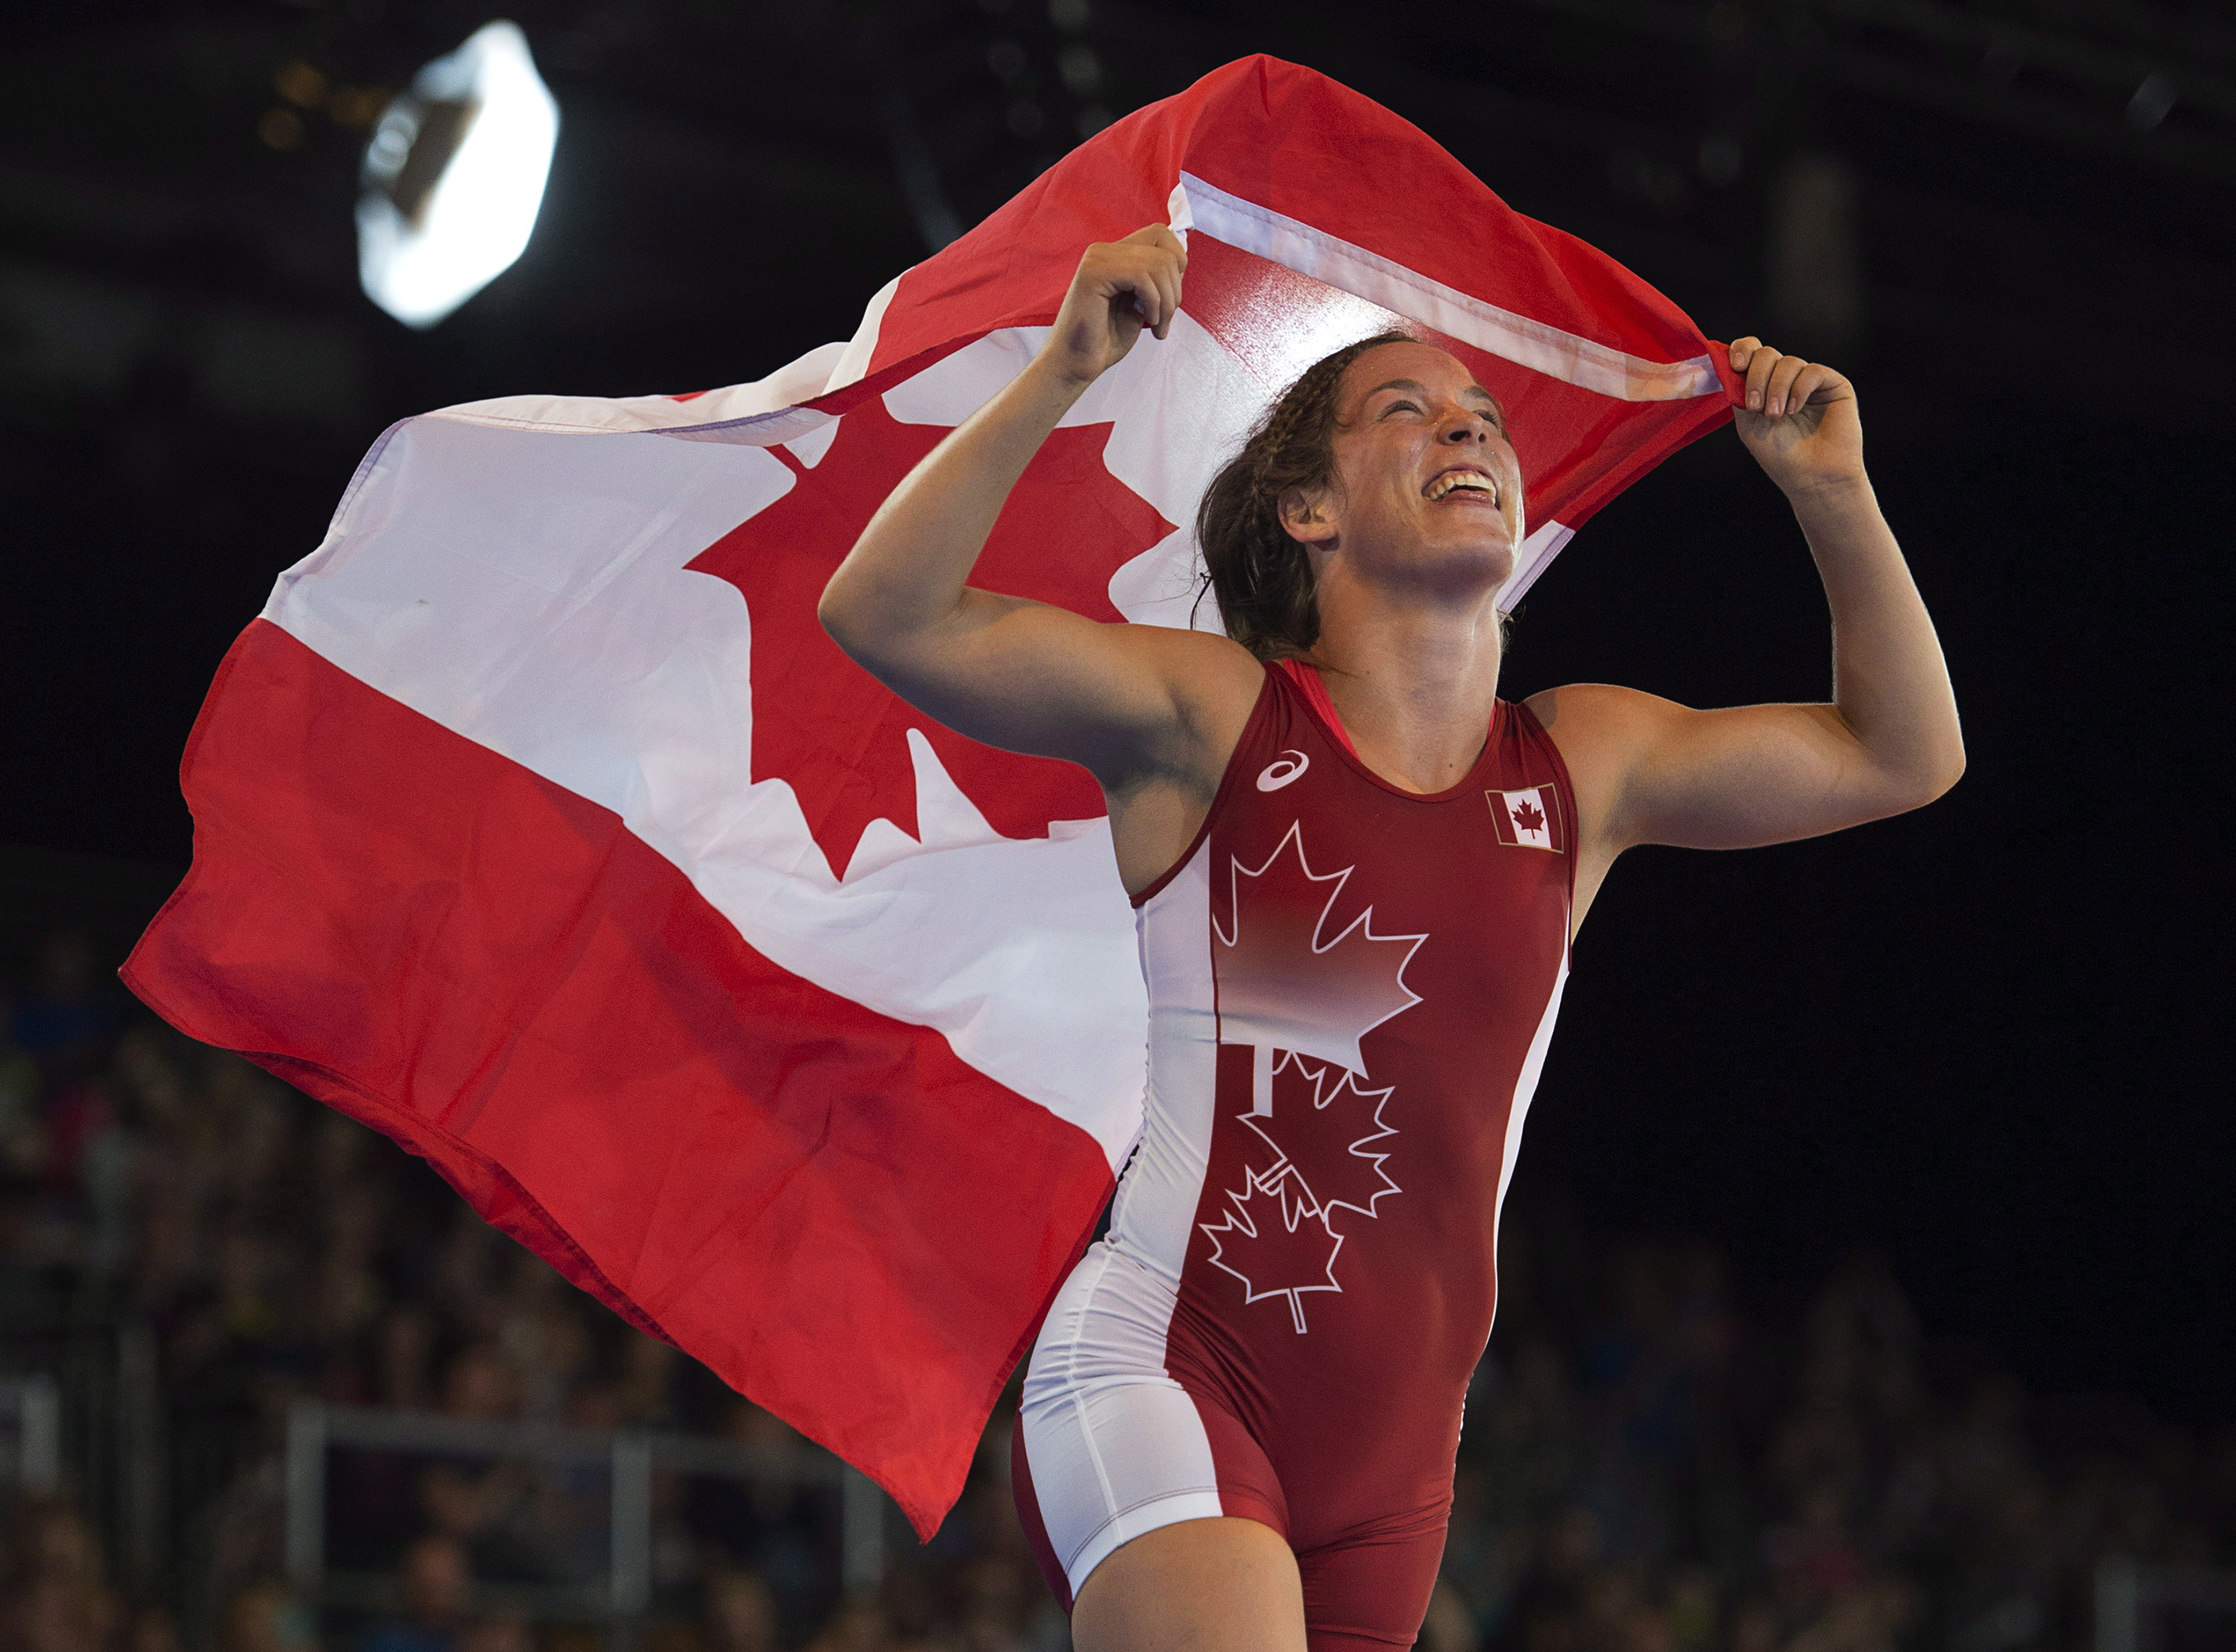 Canada's Danielle Lappage celebrates her gold medal in the women's freestyle wrestling 63-kilogram event at the Commonwealth Games action in Glasgow, Scotland on Thursday, July 31, 2014. 